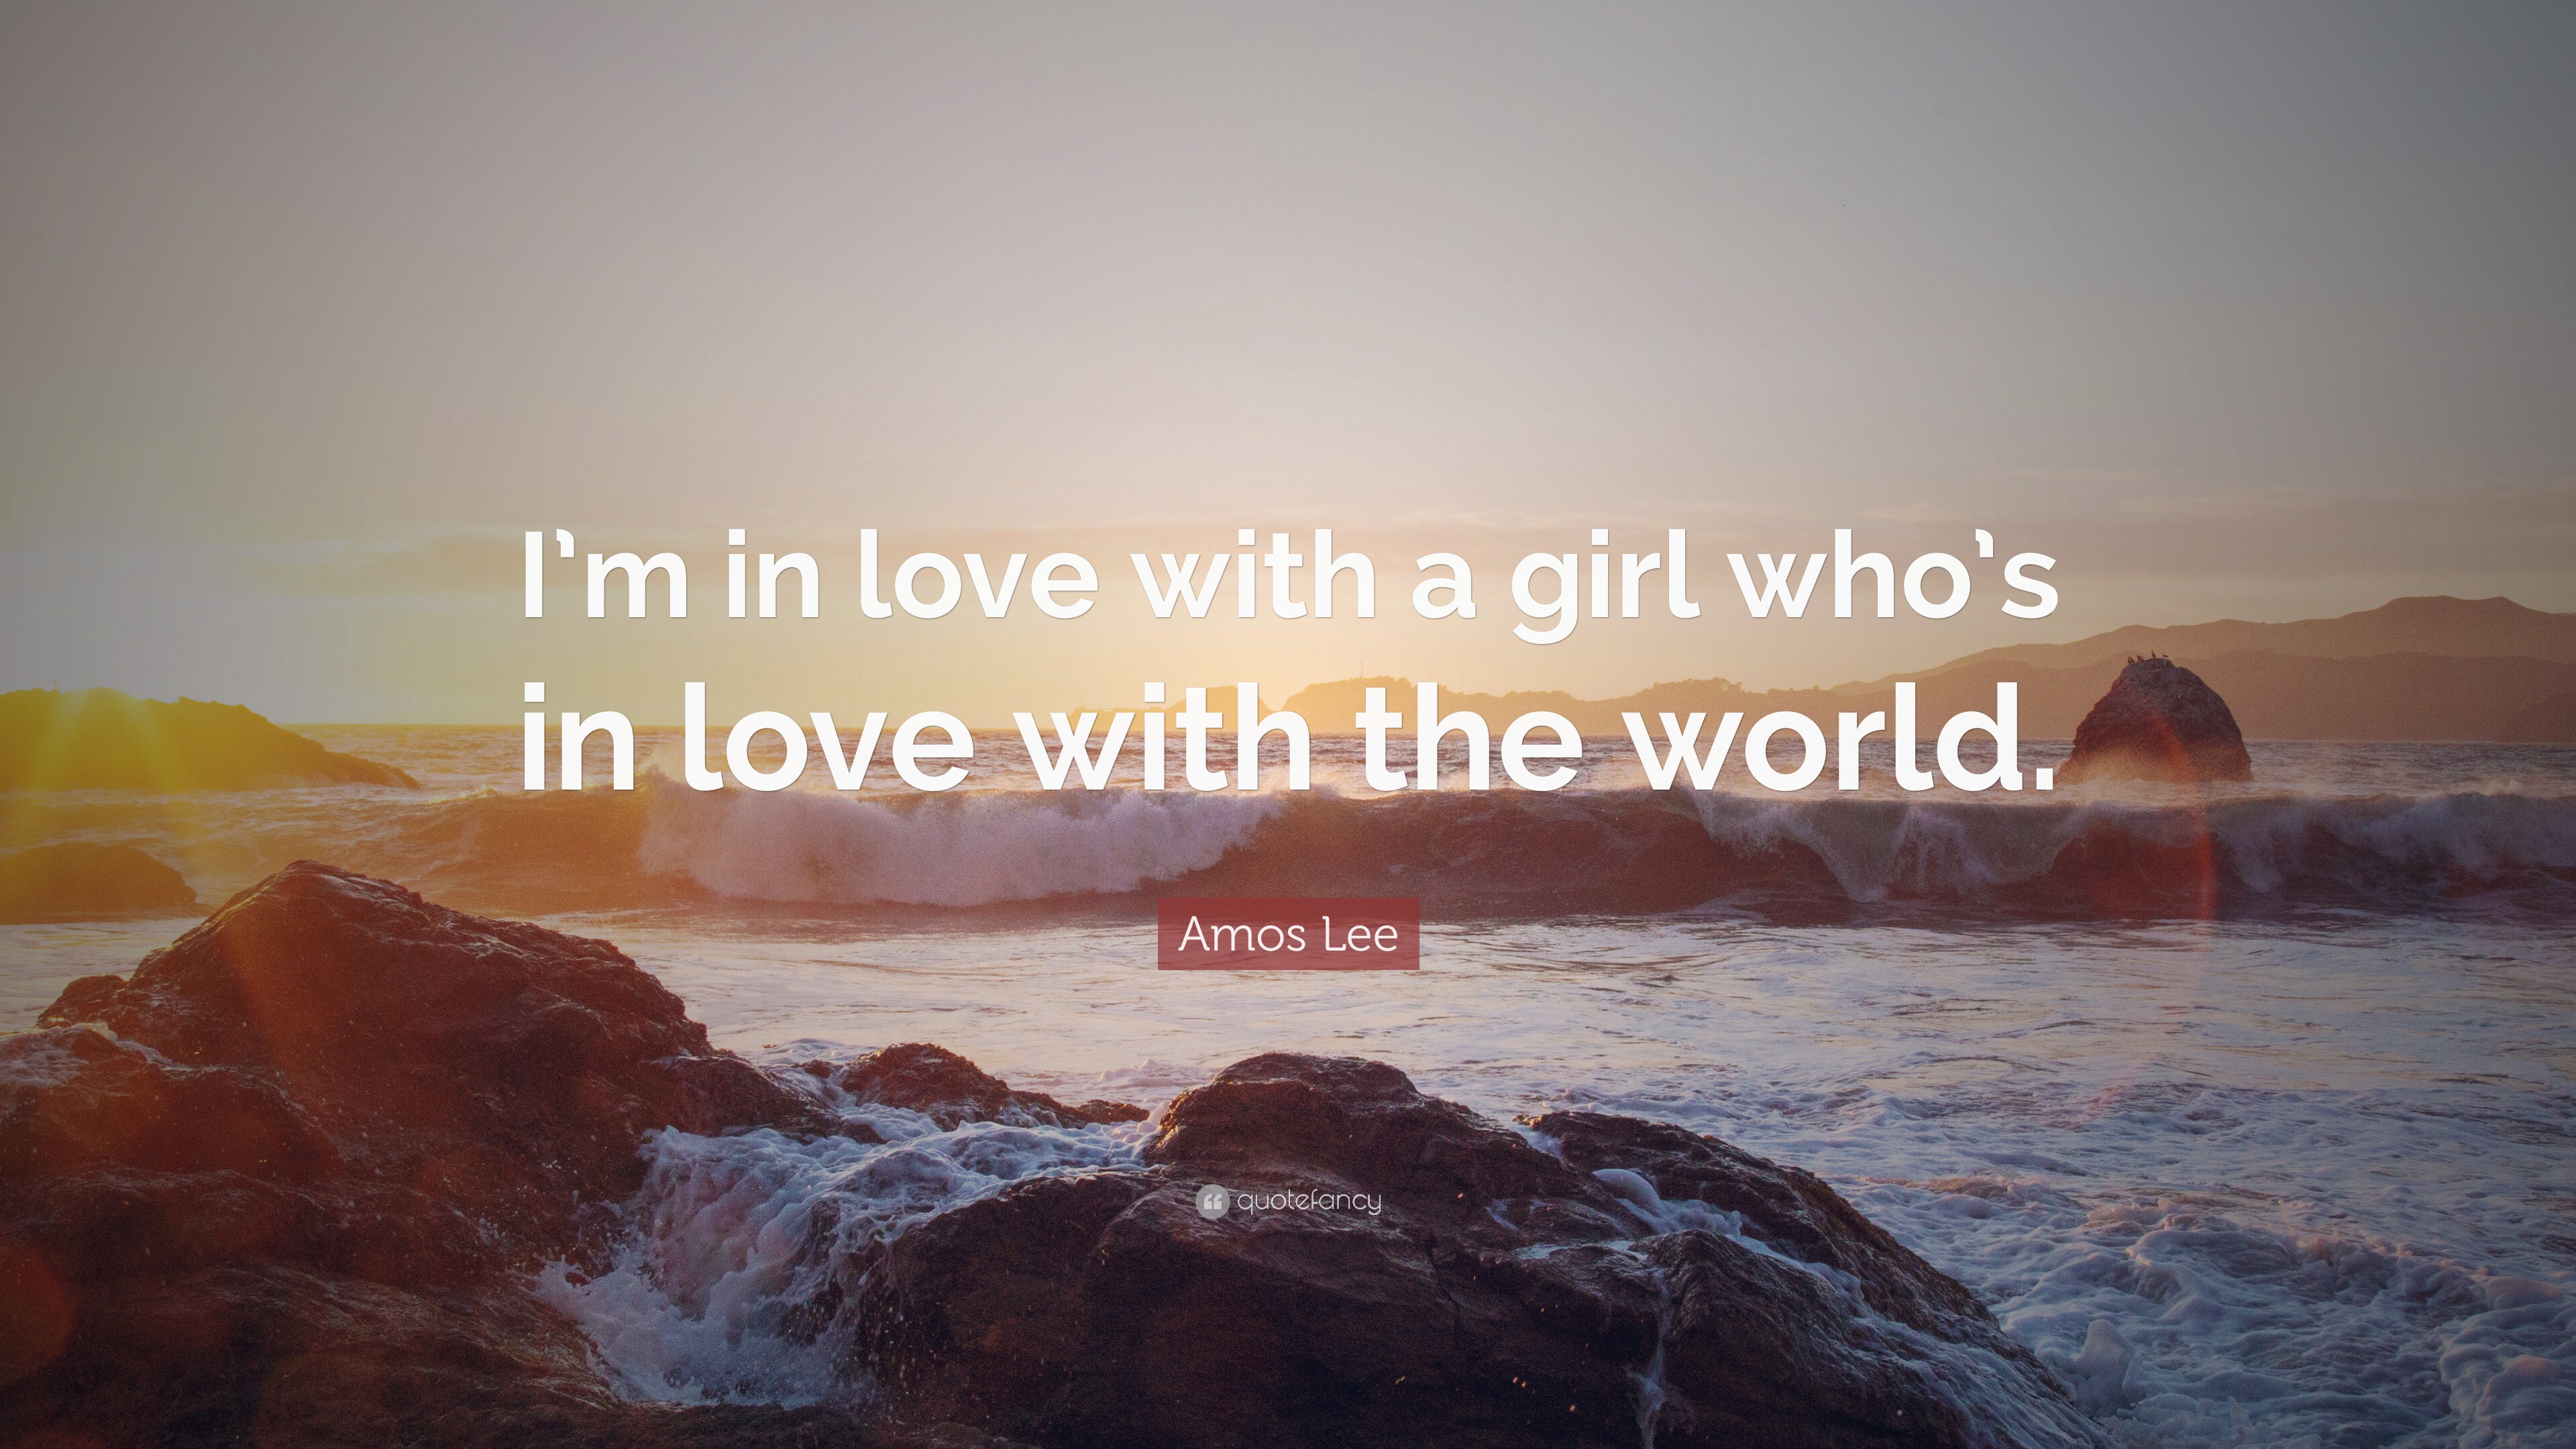 Amos Lee Quote: “I'm in love with a girl who's in love with the world.”